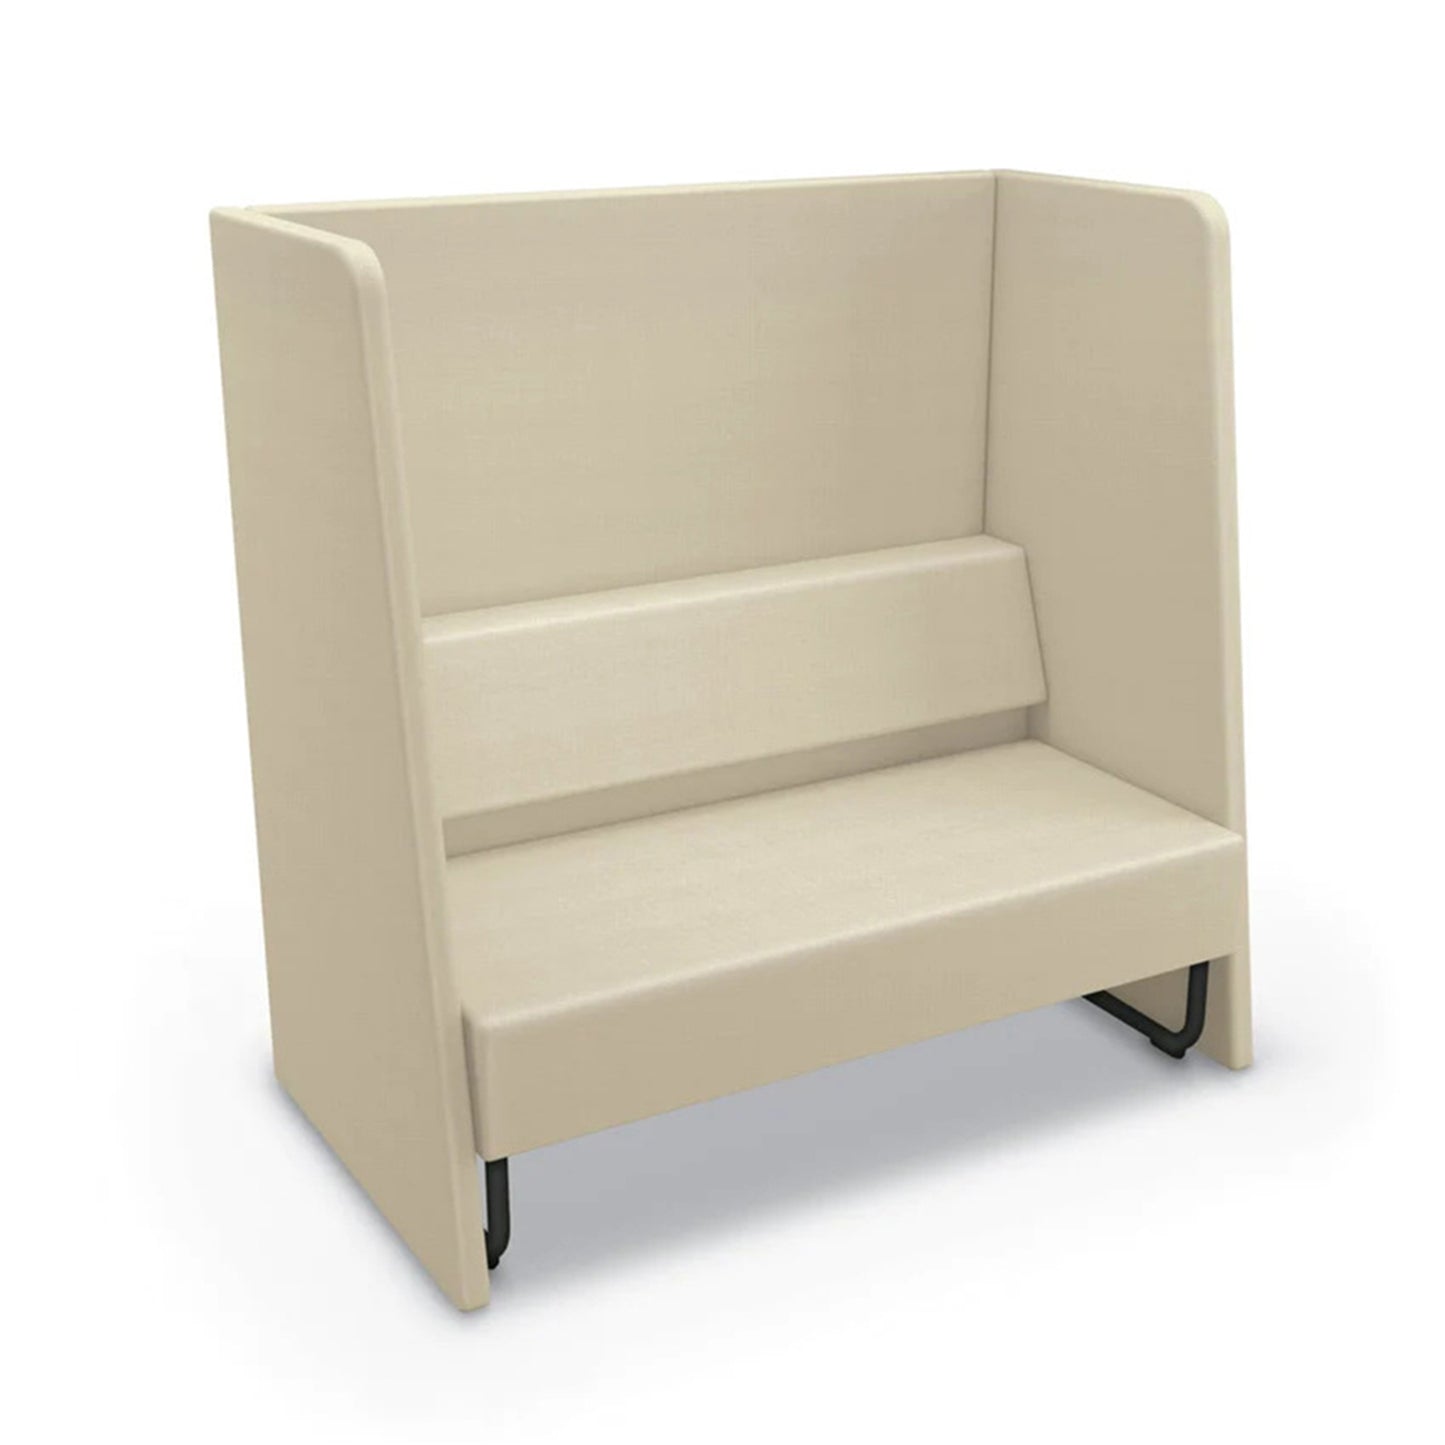 Mooreco Akt Soft Seating Lounge High Back Loveseat - Grade 02 Fabric and Powder Coated Sled Legs